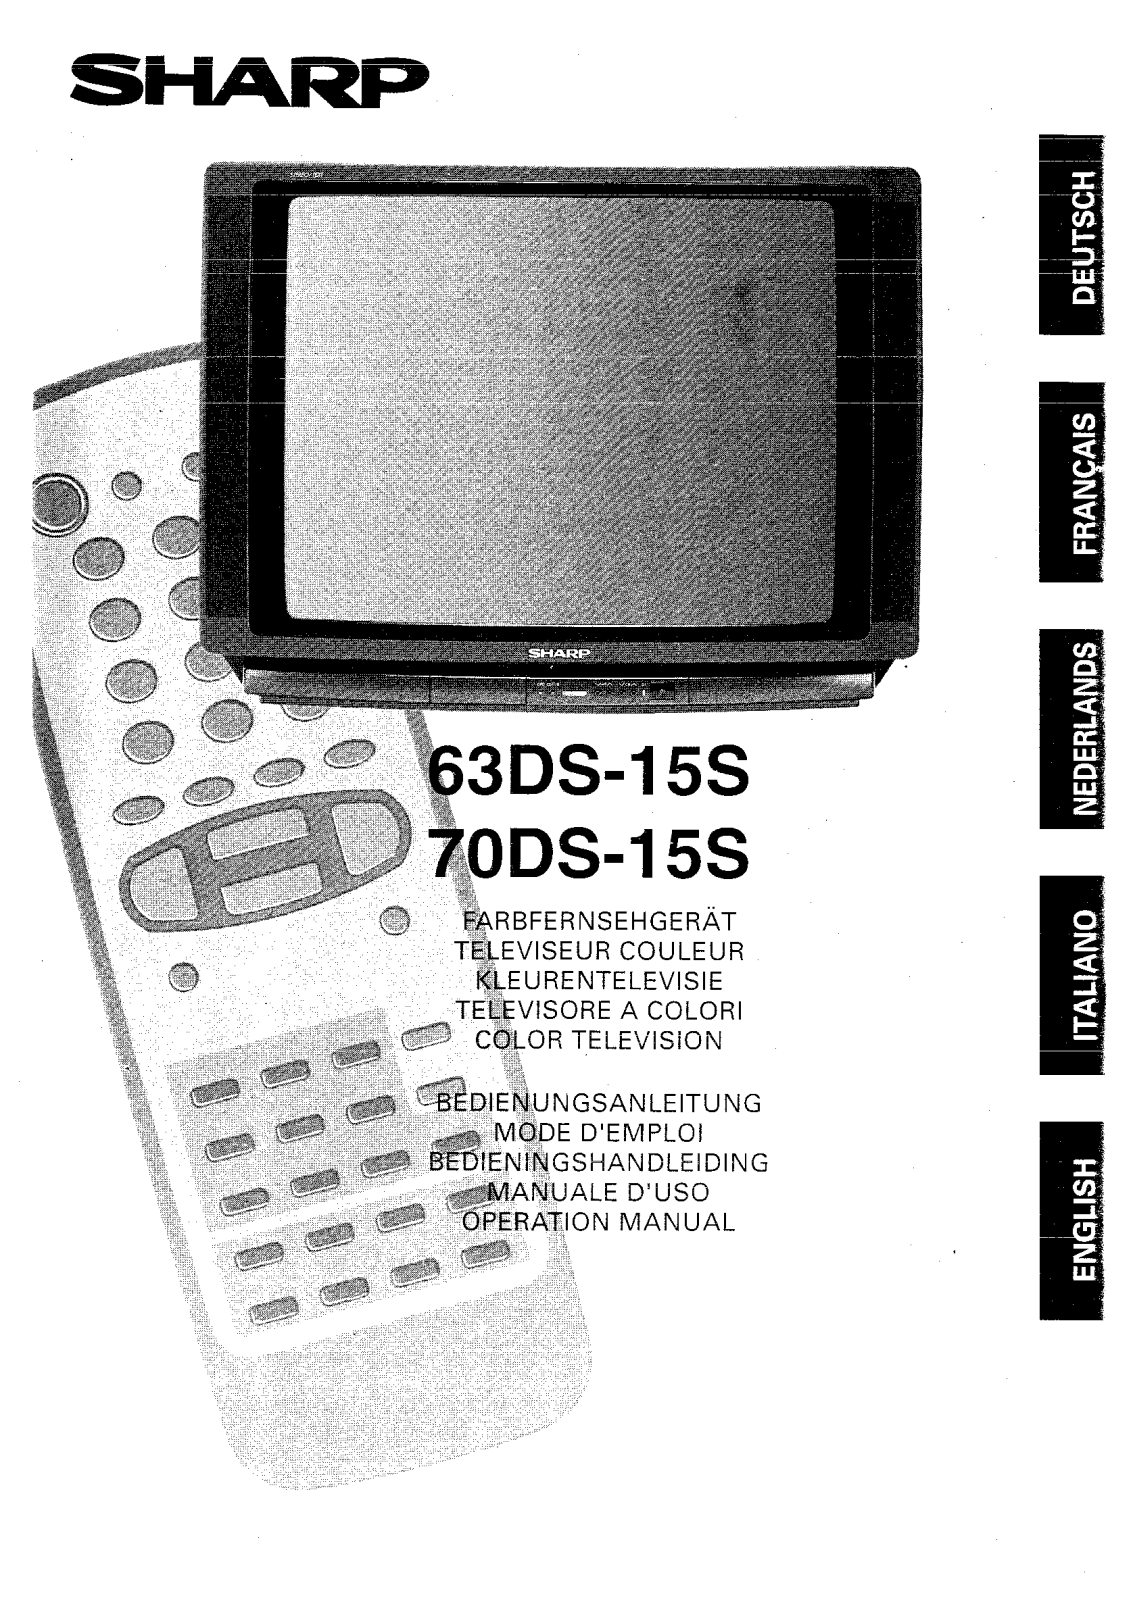 Sharp 63DS-15S, 70DS-15S Manual